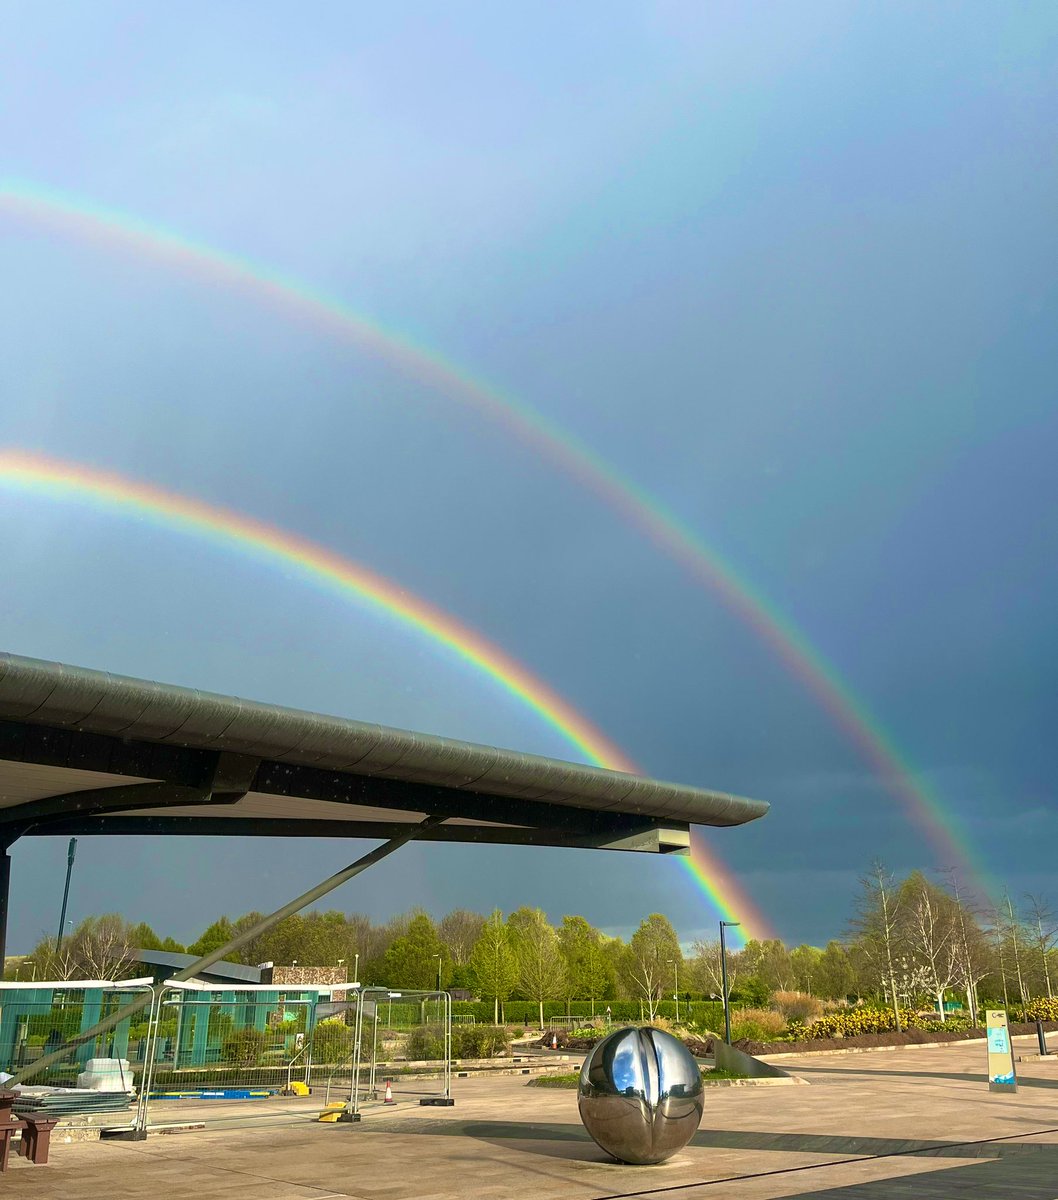 Ending the workday on a high note with a breathtaking double rainbow at the Wellcome Genome Campus! 🌈🌈 #DoubleRainbow